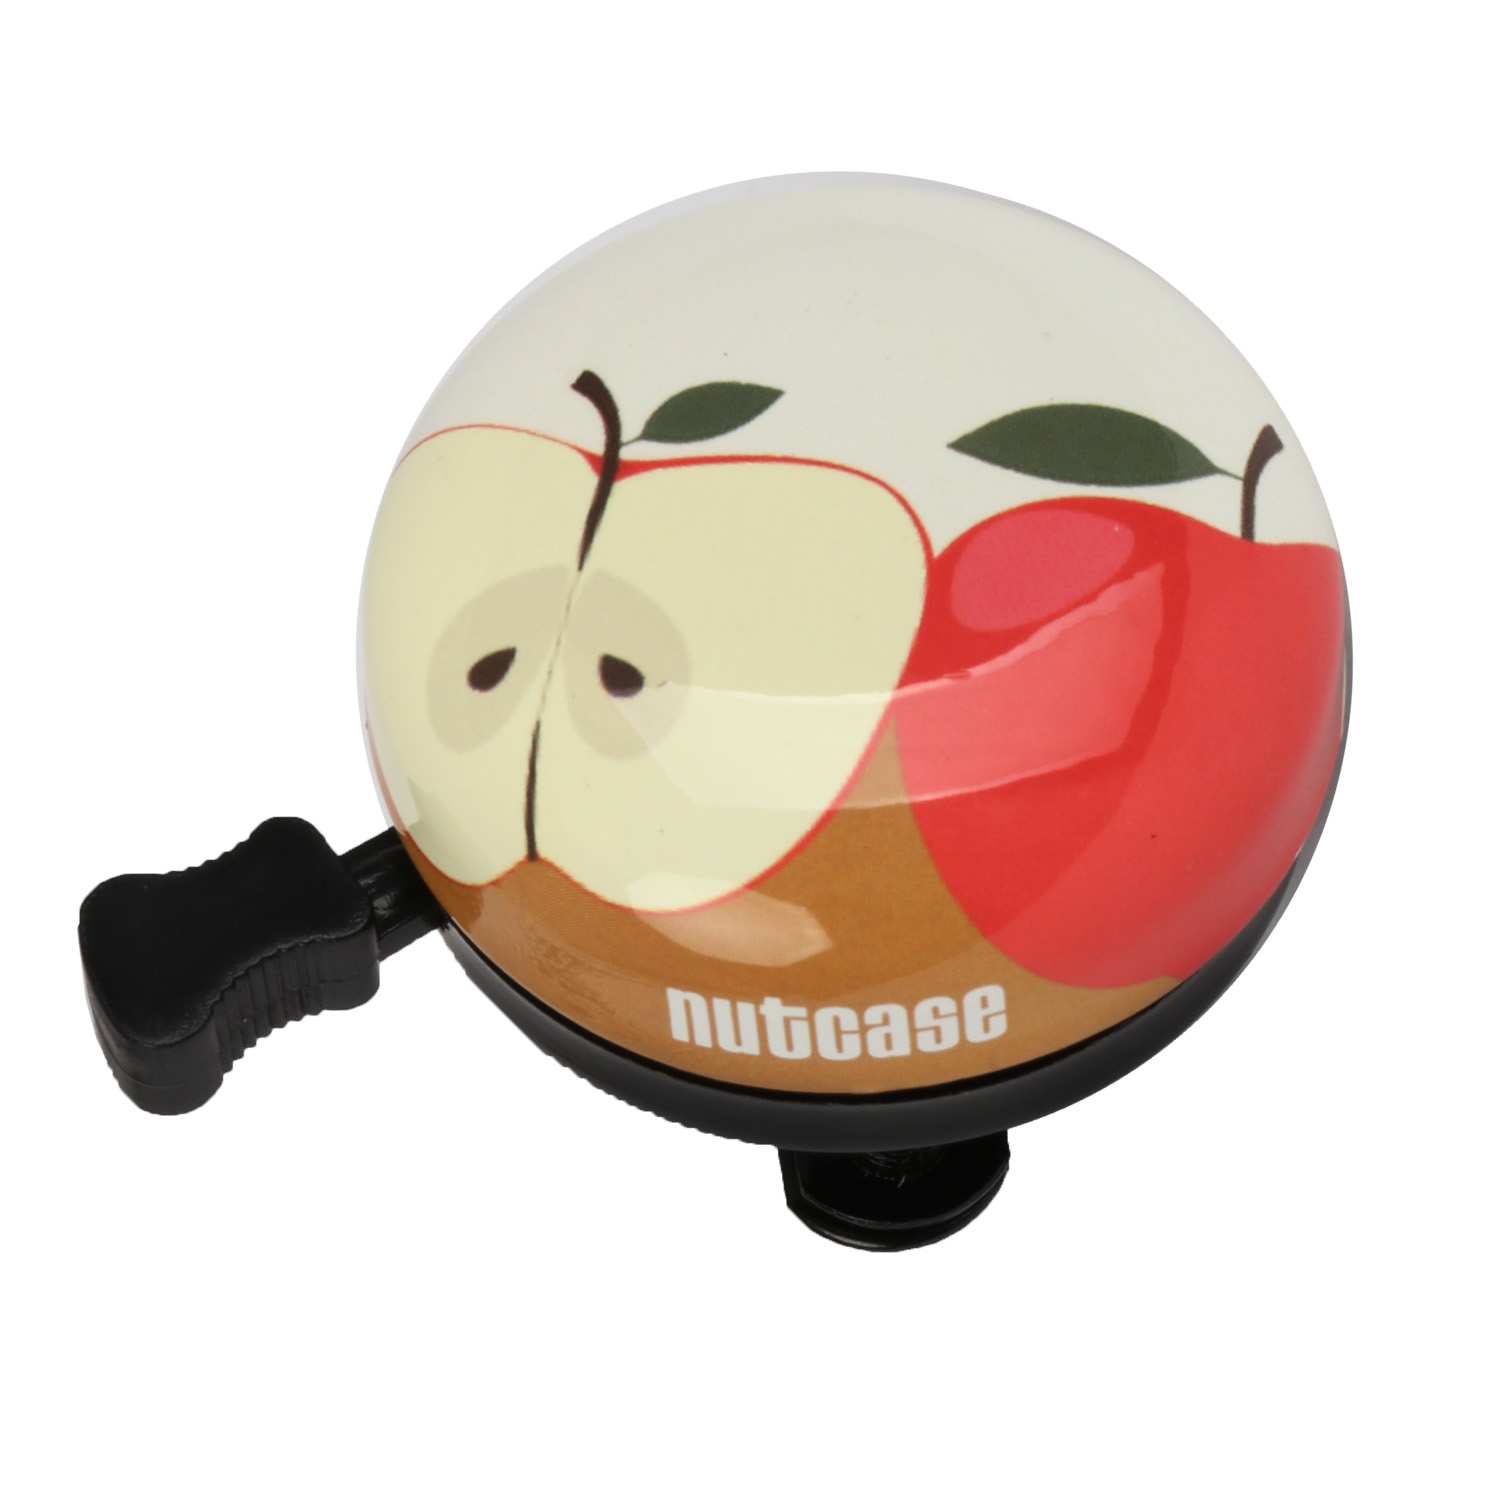 Productfoto van Nutcase Large Bicycle Bell - Apple a Day